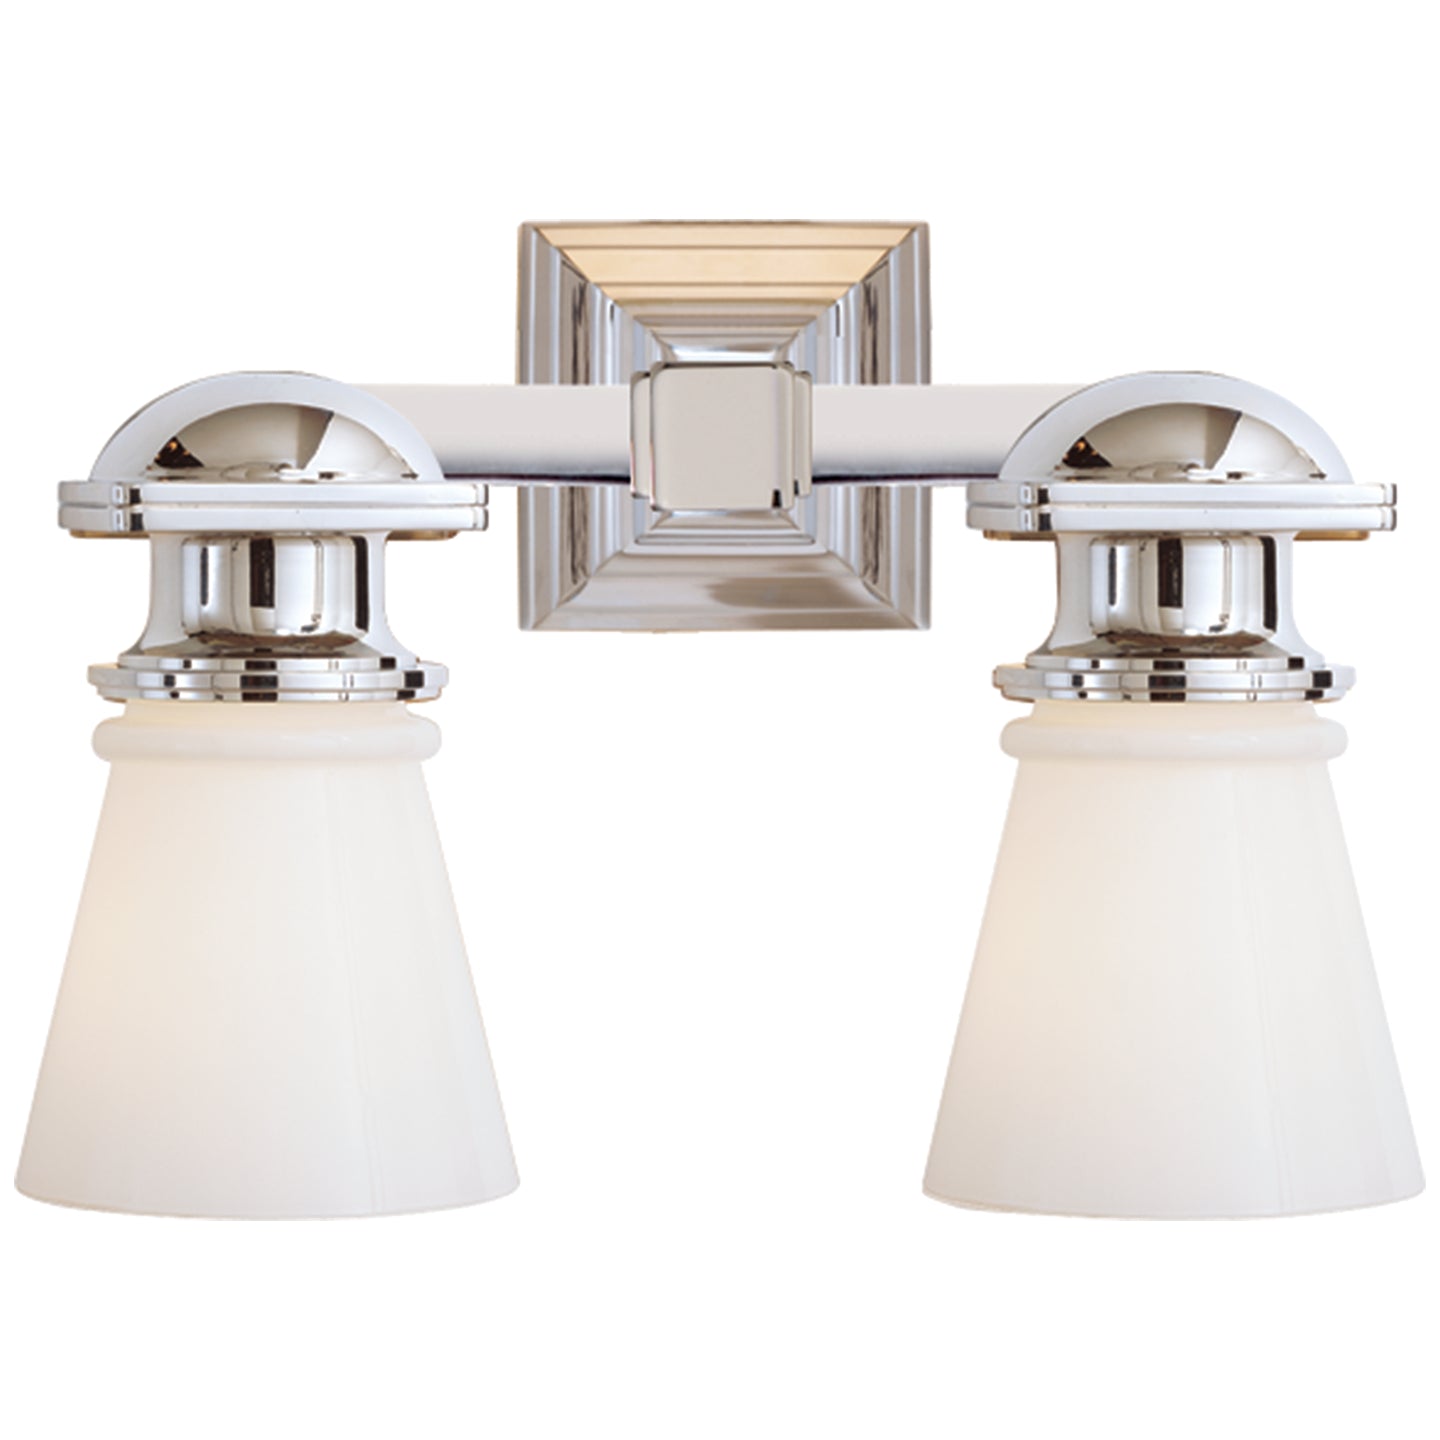 Visual Comfort Signature - SL 2152CH-WG - Two Light Wall Sconce - NY Subway - Chrome